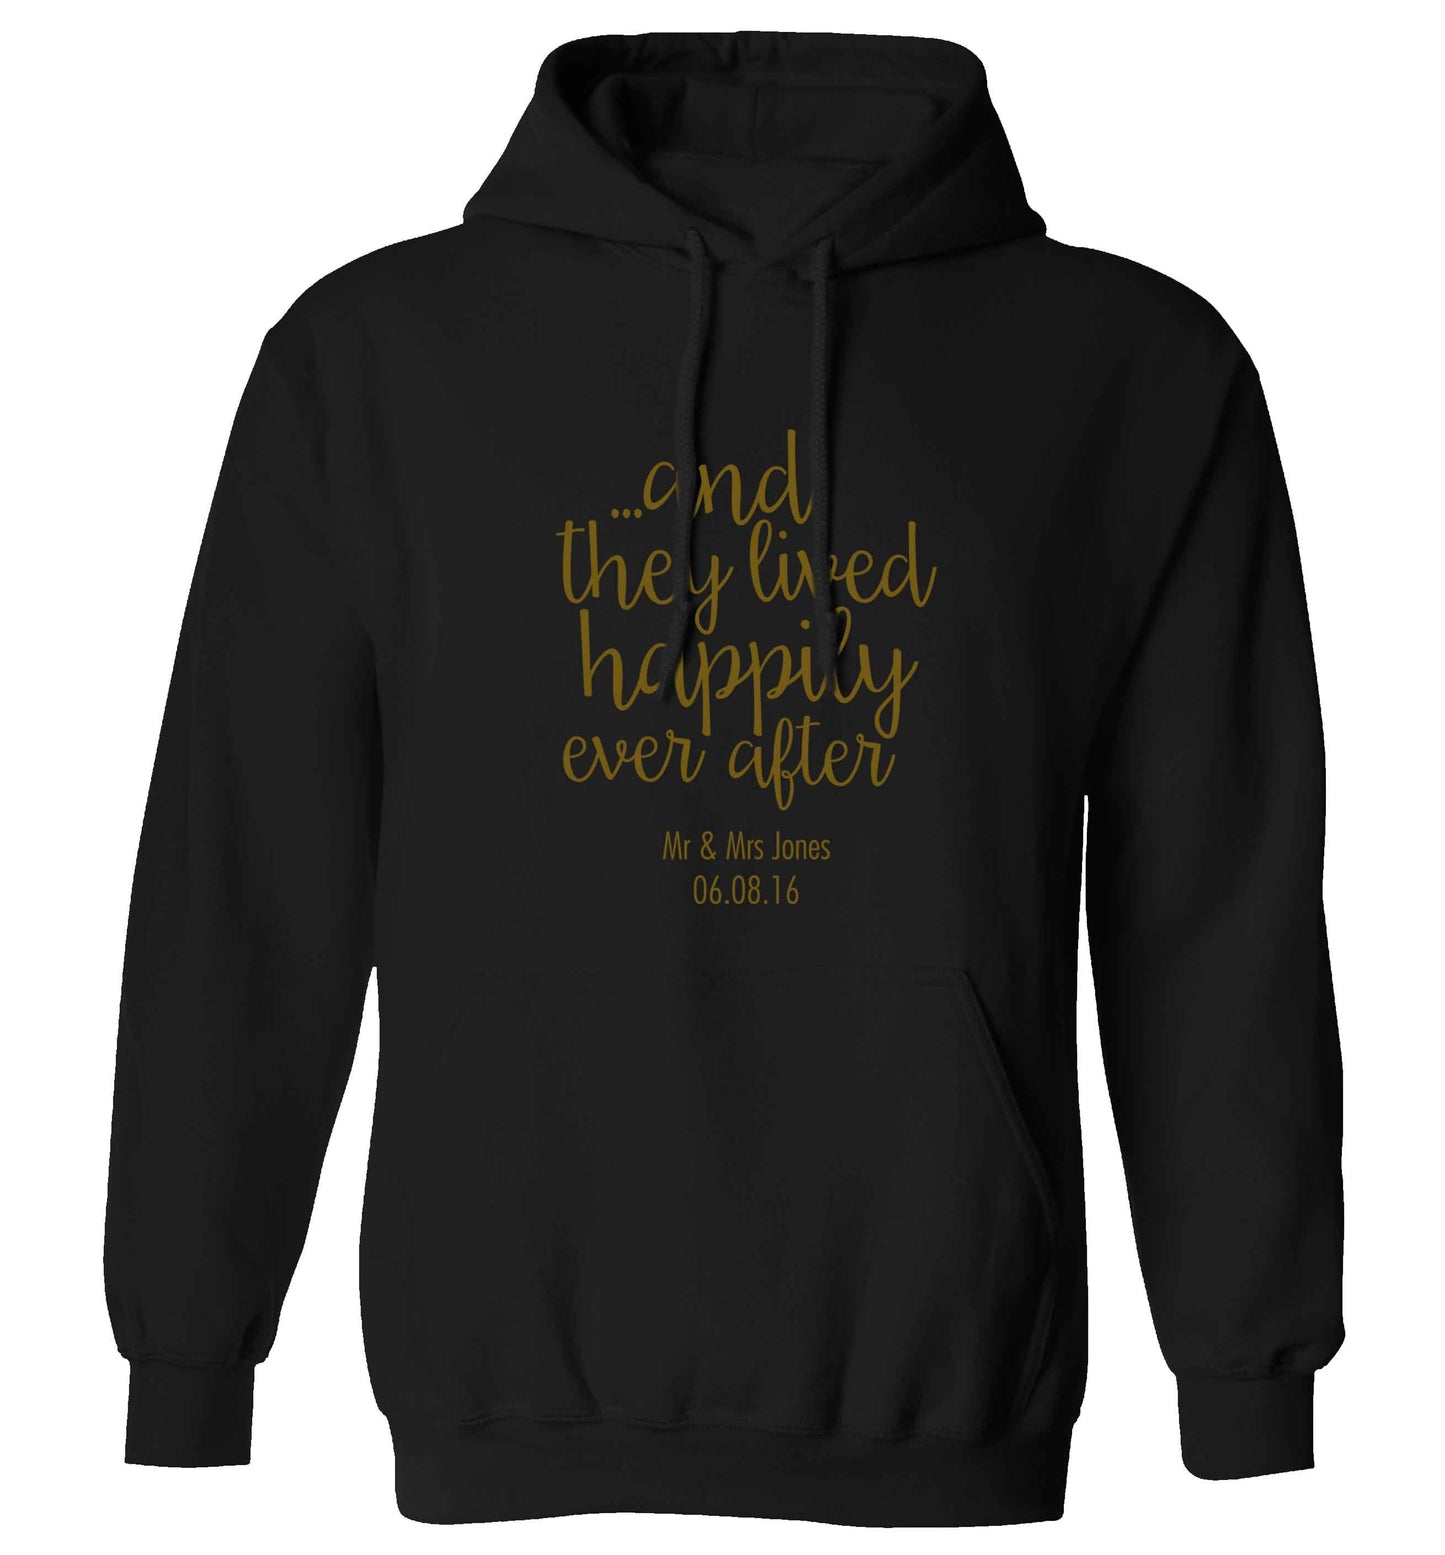 ...and they lived happily ever after - personalised date and names adults unisex black hoodie 2XL